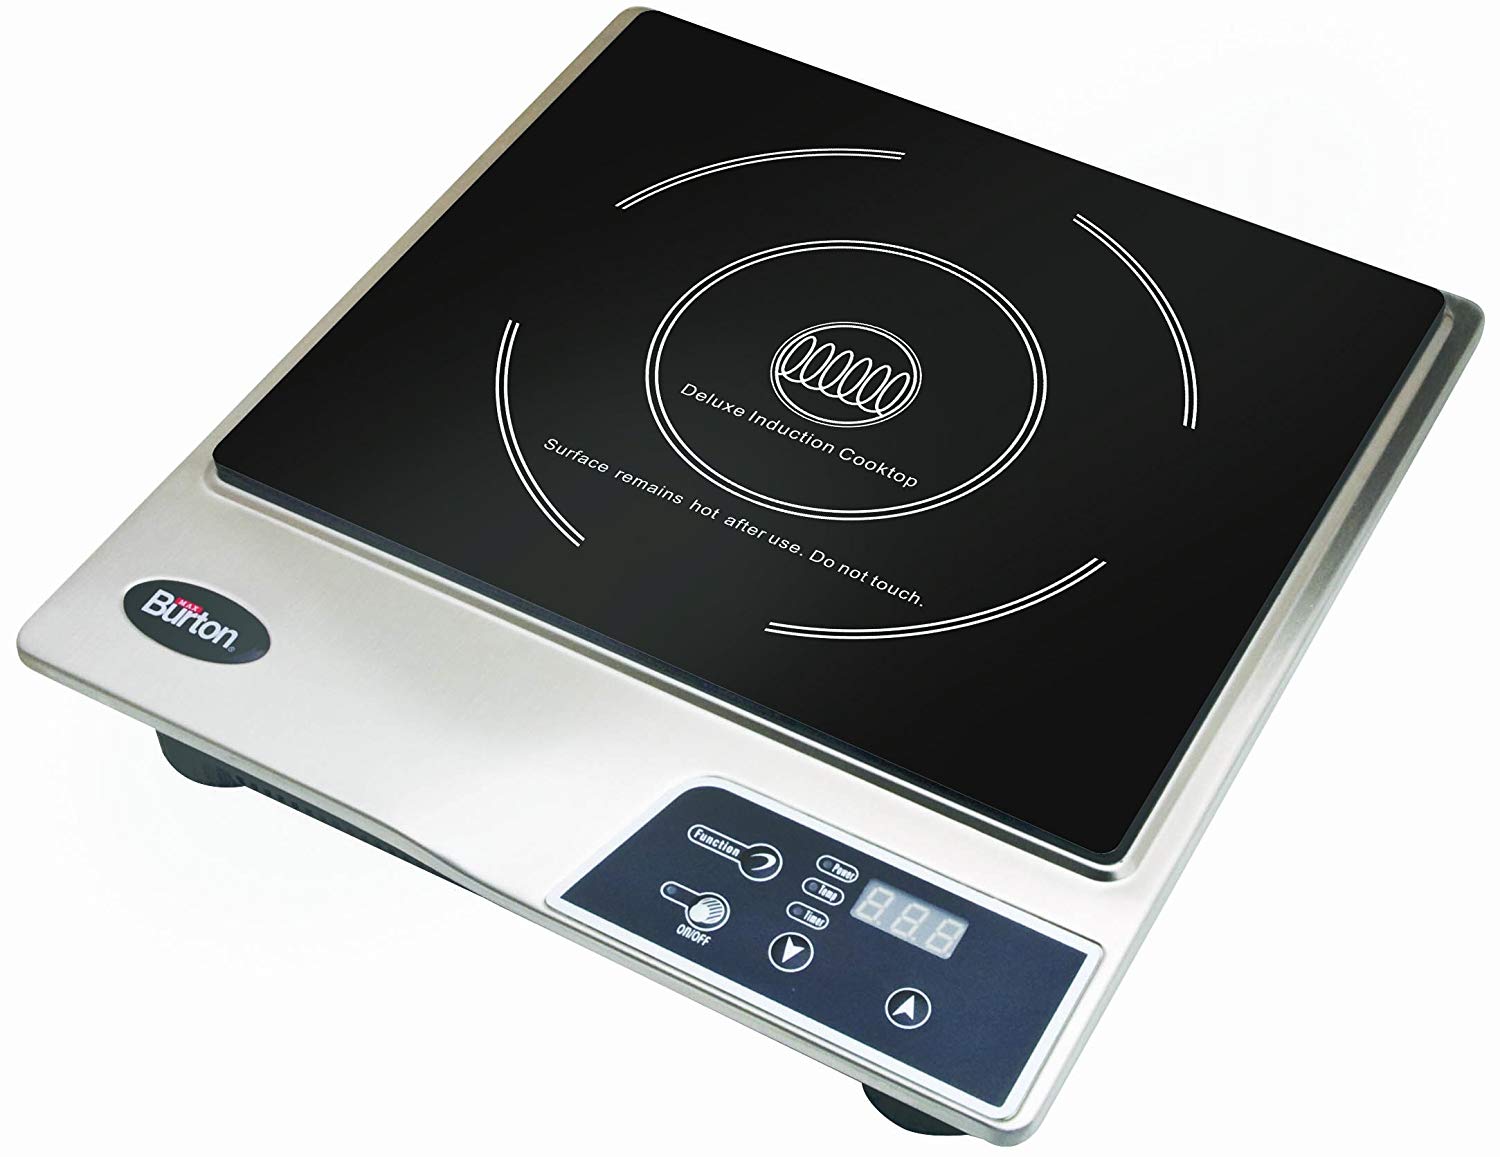 max-burton-6200-induction-cooktop-only-for-those-who-demand